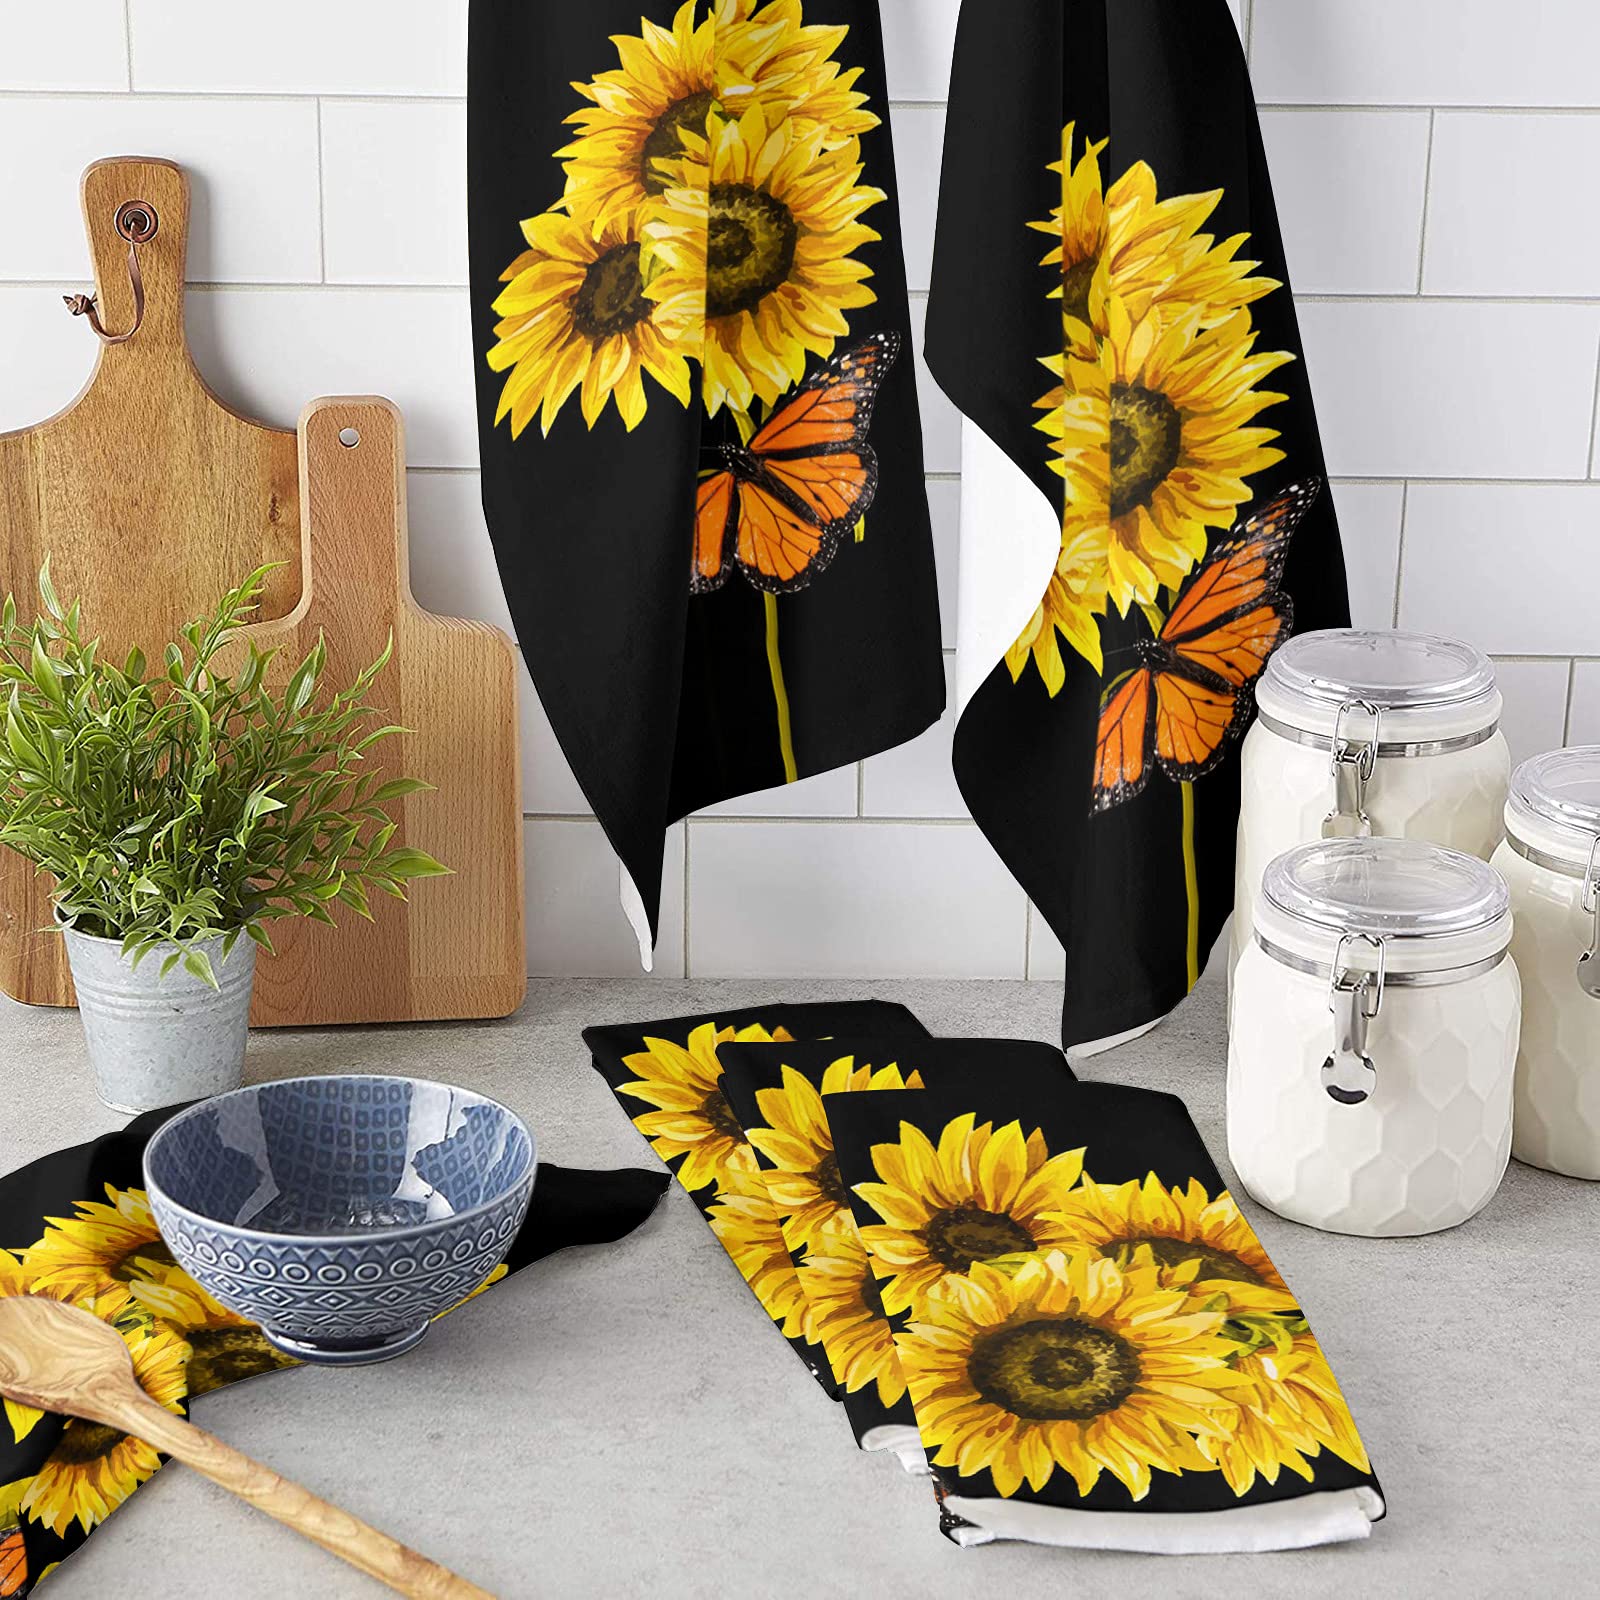 Kitchen Dish Towels 3 Pack-Super Absorbent Soft Microfiber,Abstract Sunflower Monarch Butterfly Black Pattern Cleaning Dishcloth Hand Towels Tea Towels for Kitchen Bathroom Bar